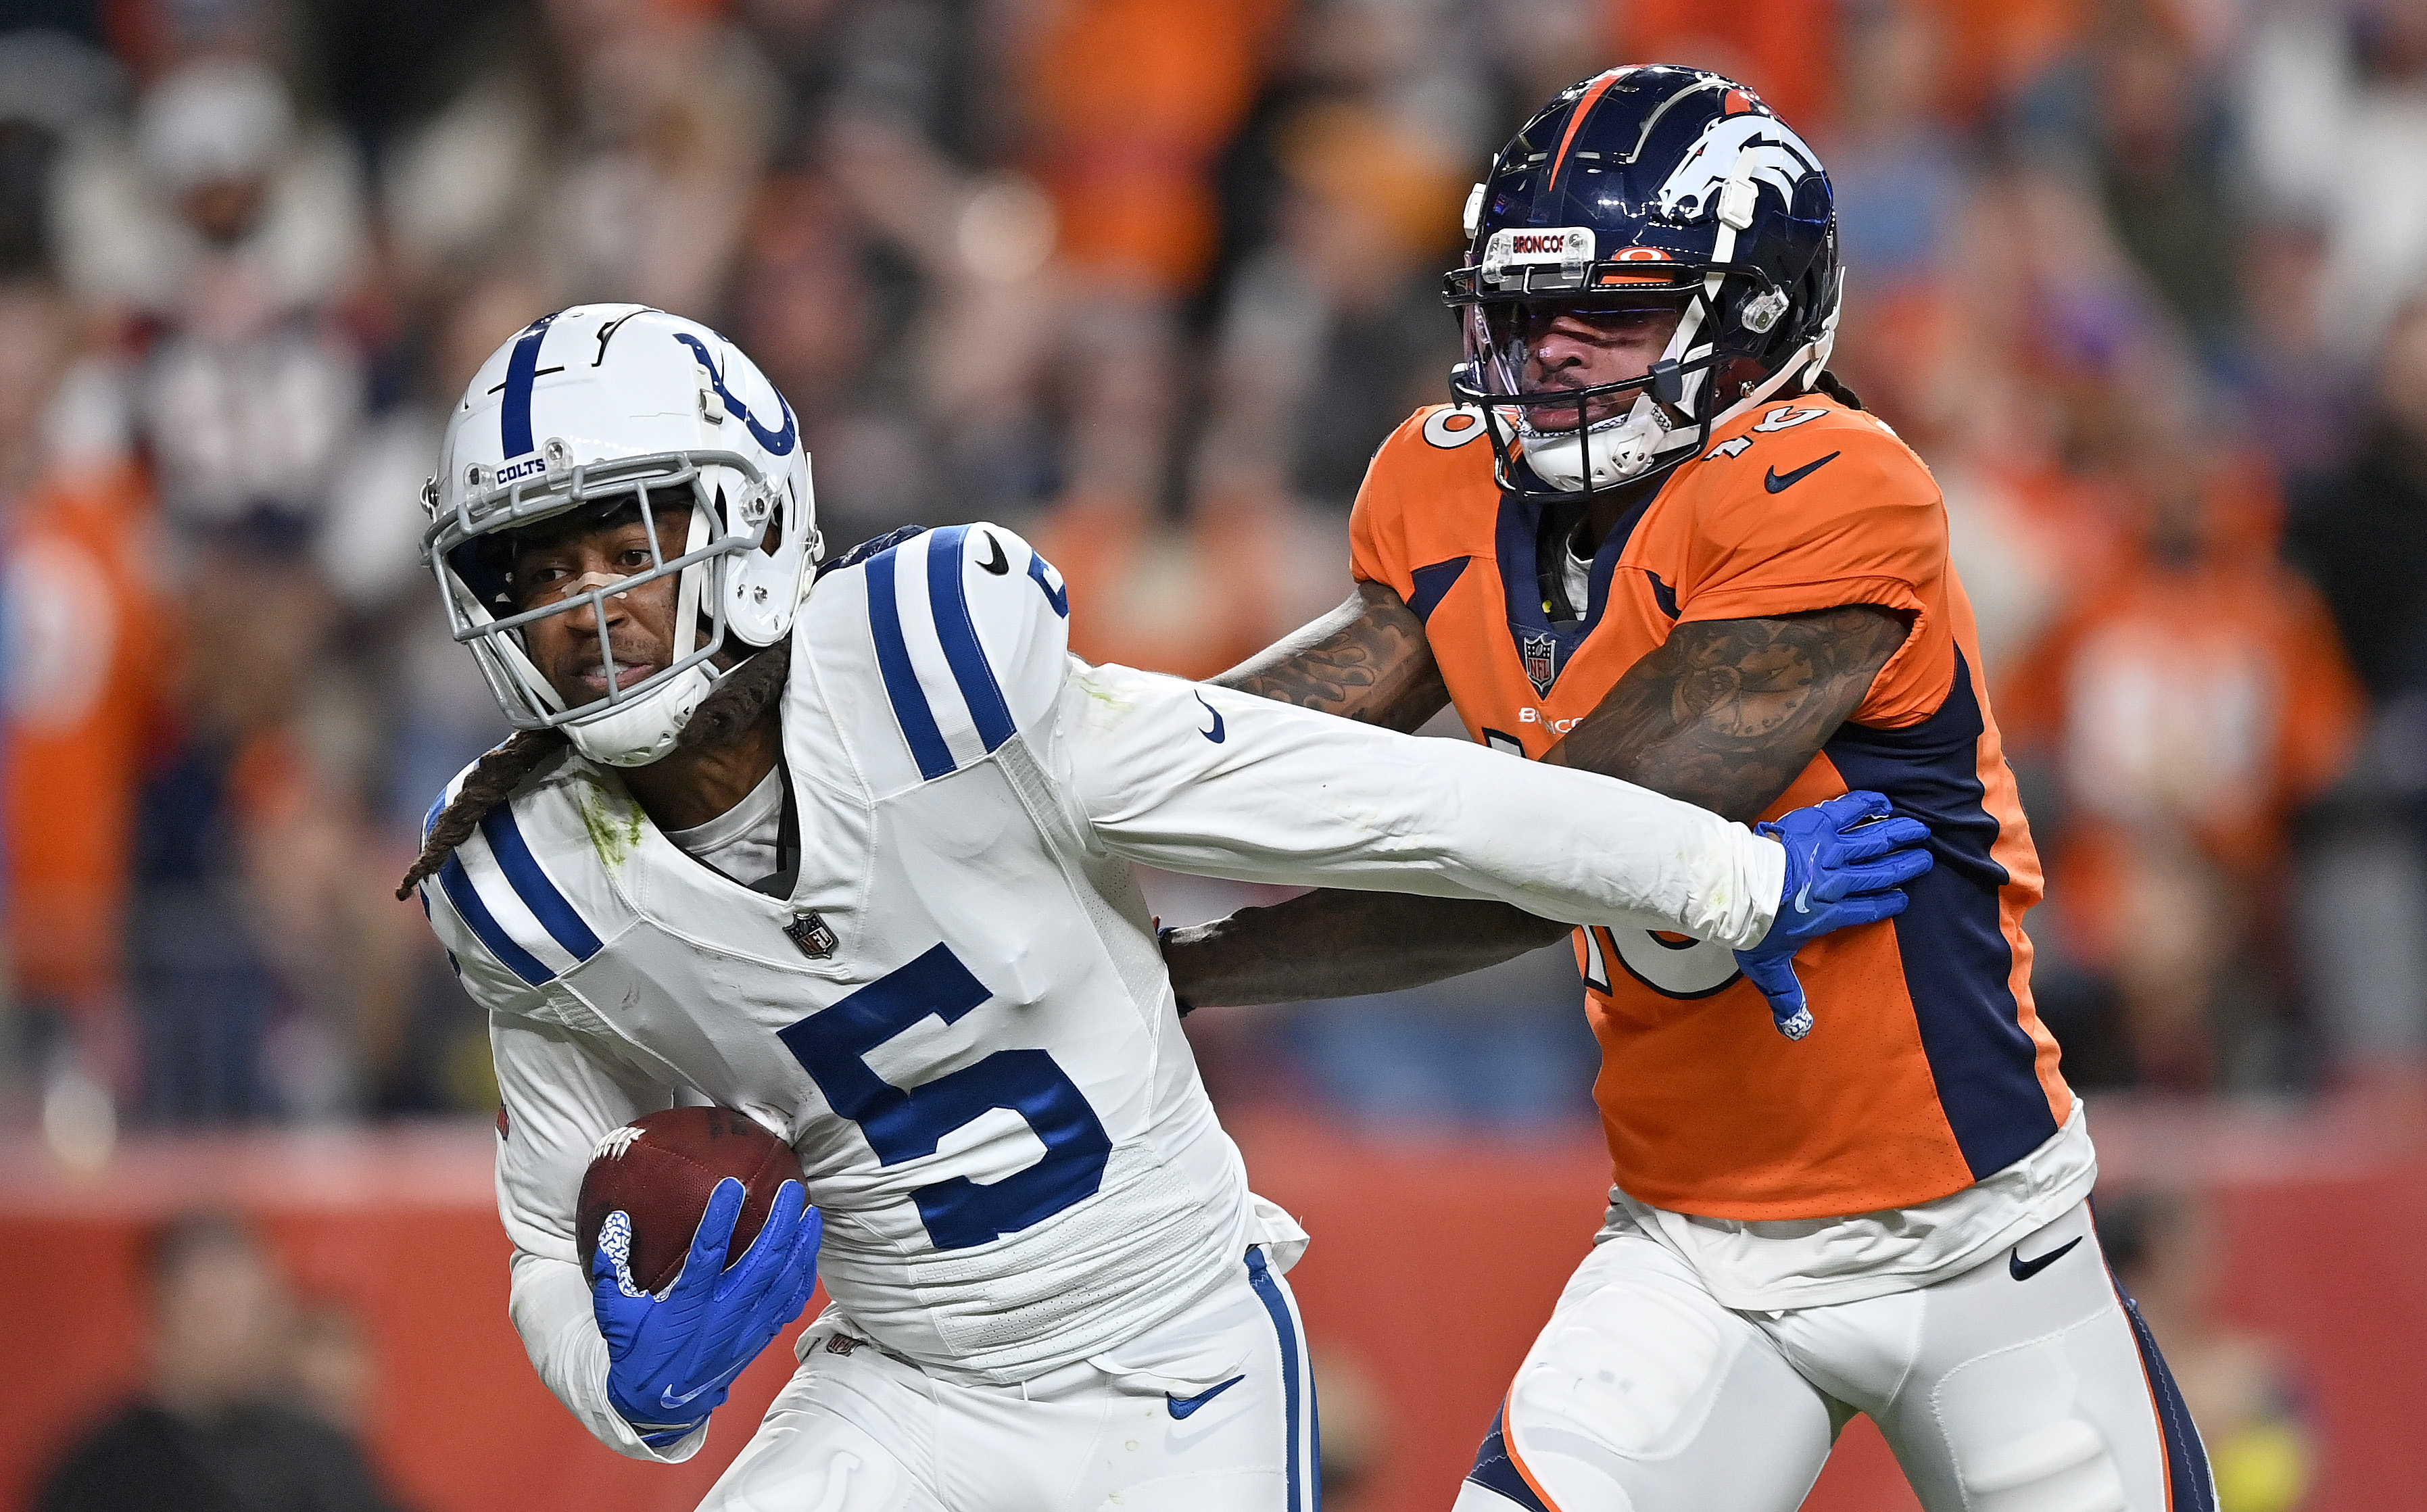 IND 12-9 Colts Stop Broncos on 4th Down to Seal OT Win